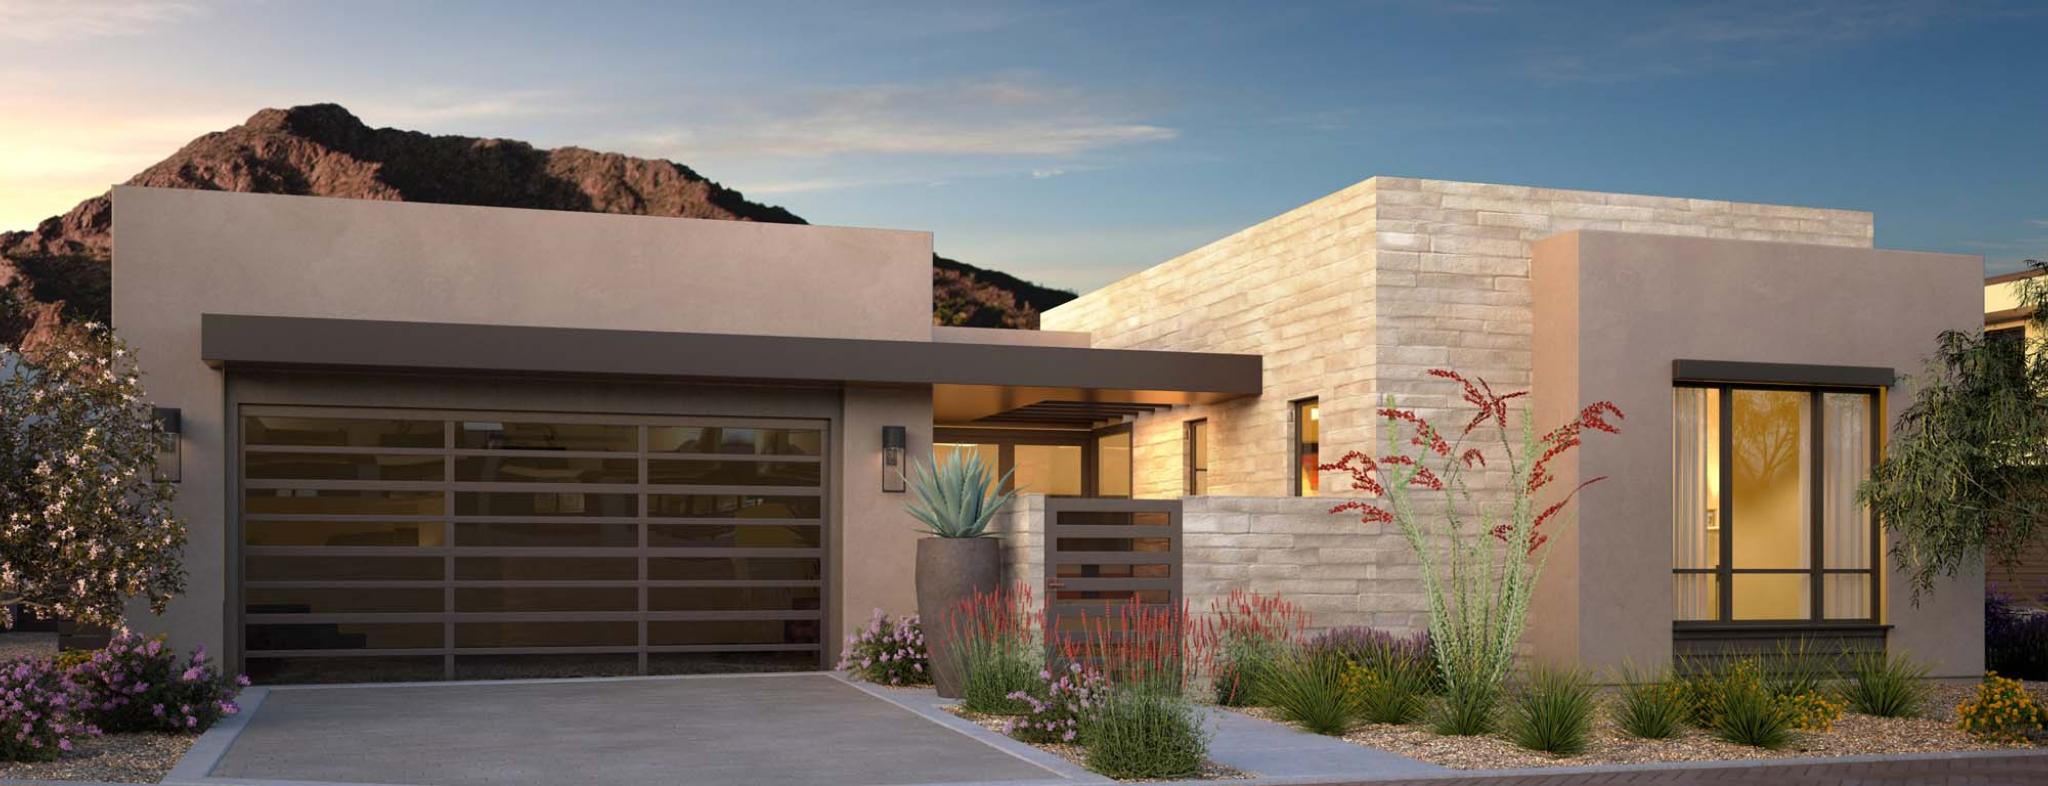 The New Home Company Announces Premiere of The Residences & Villas Models at Mountain Shadows Resort, its First Community in Arizona